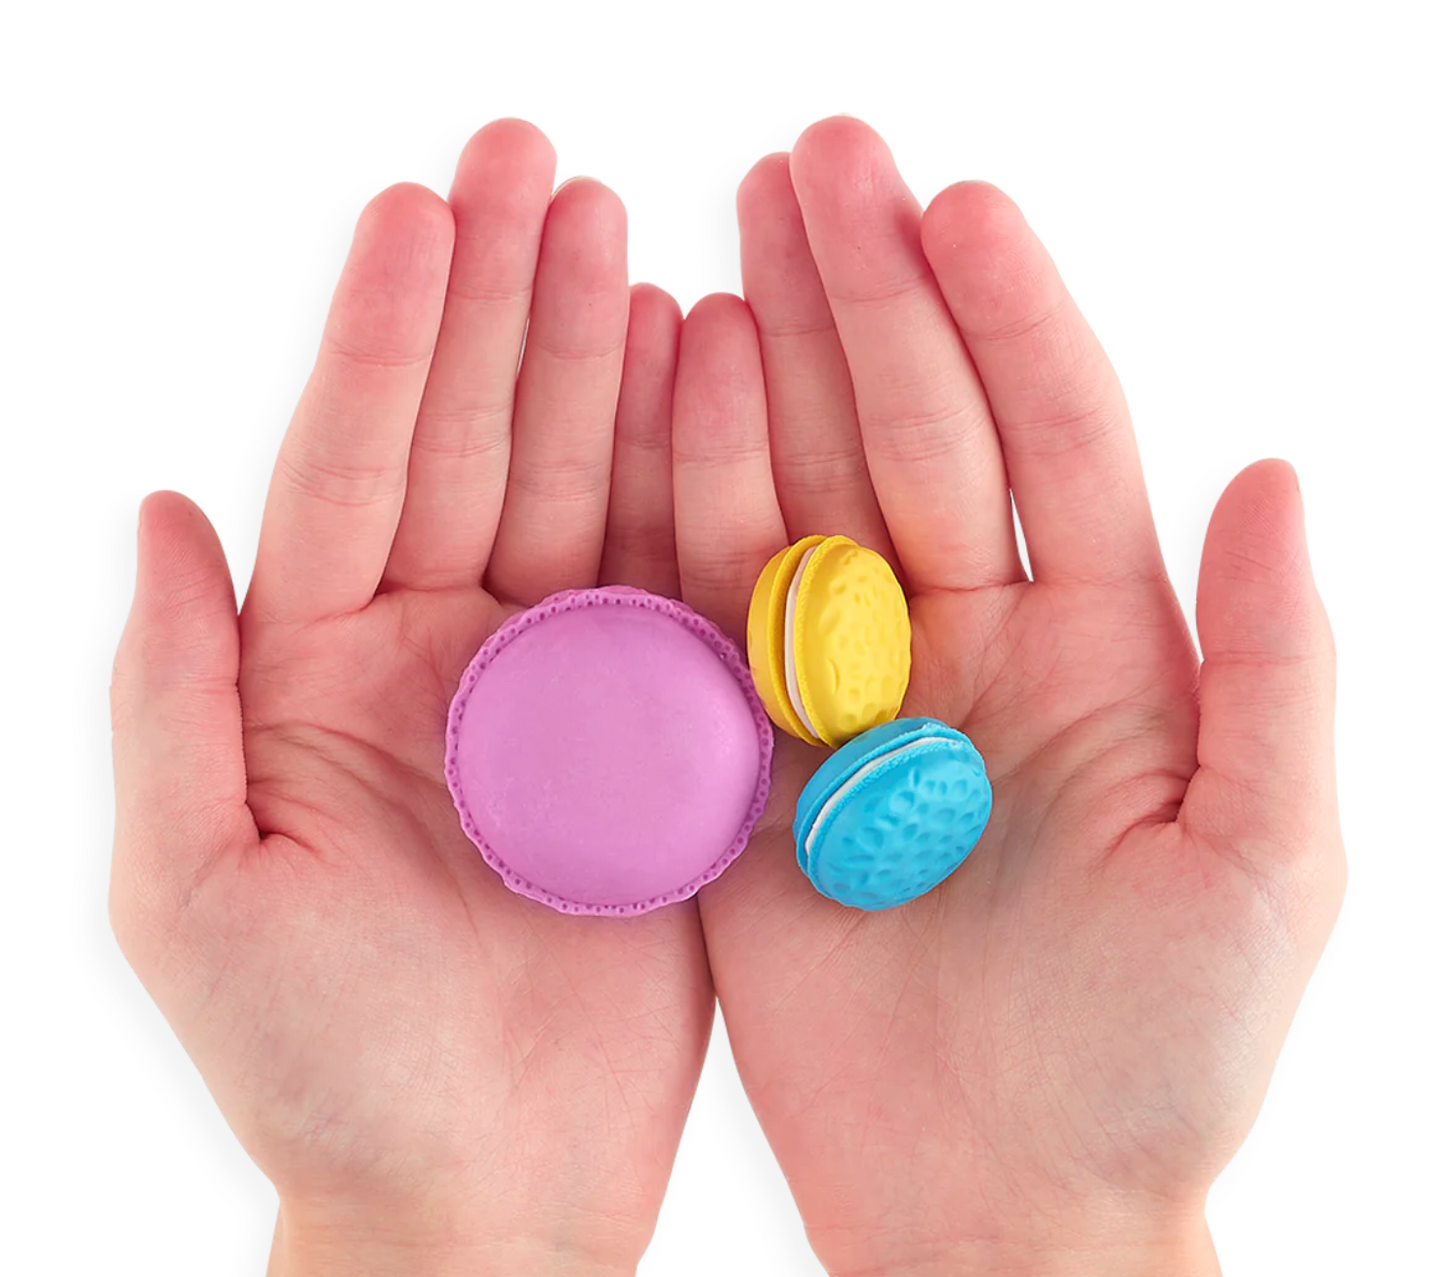 Le Macaron Pâtisserie Scented Erasers - Set of 5